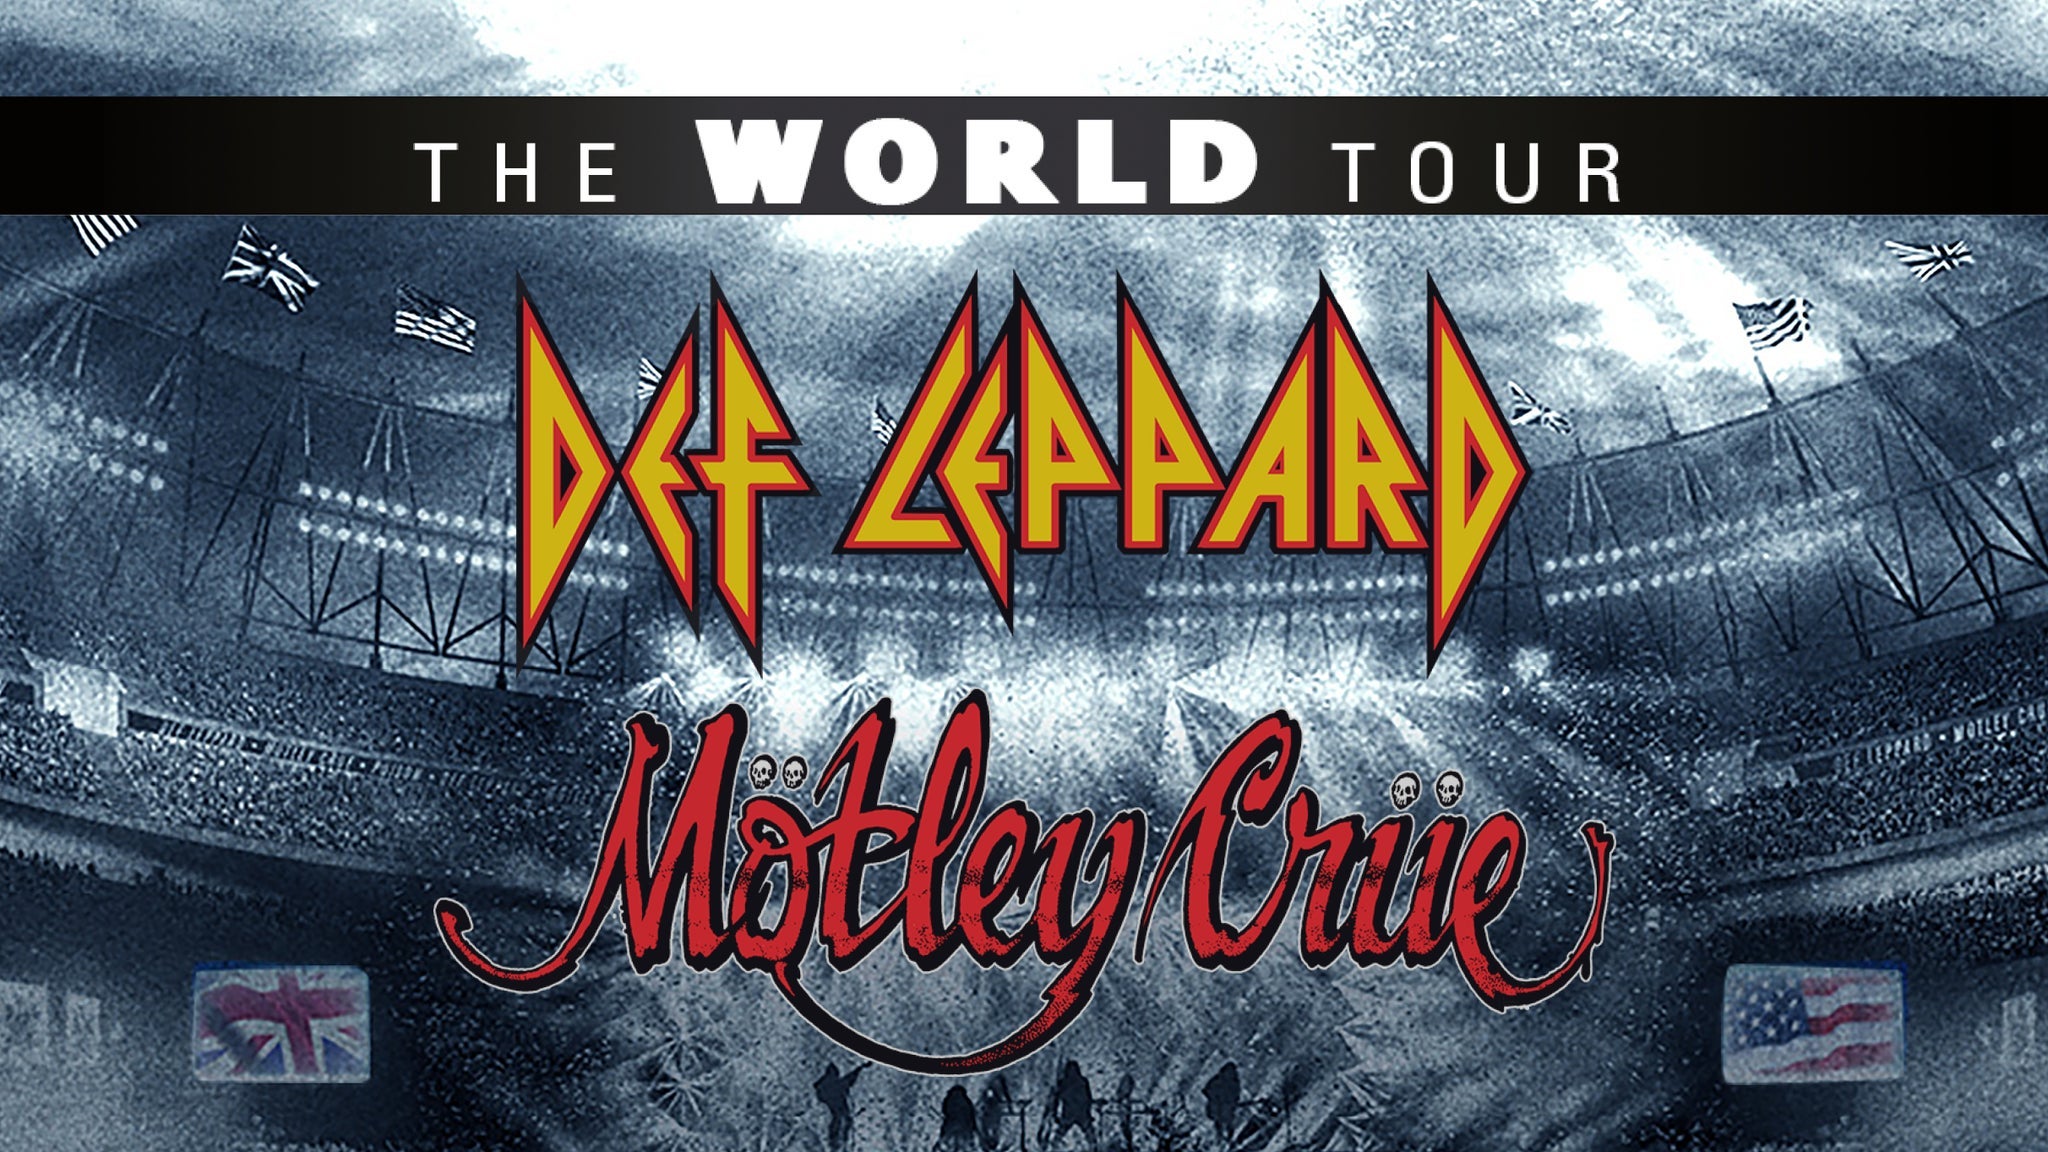 Image used with permission from Ticketmaster | Def Leppard & Mötley Crüe: The World Tour tickets